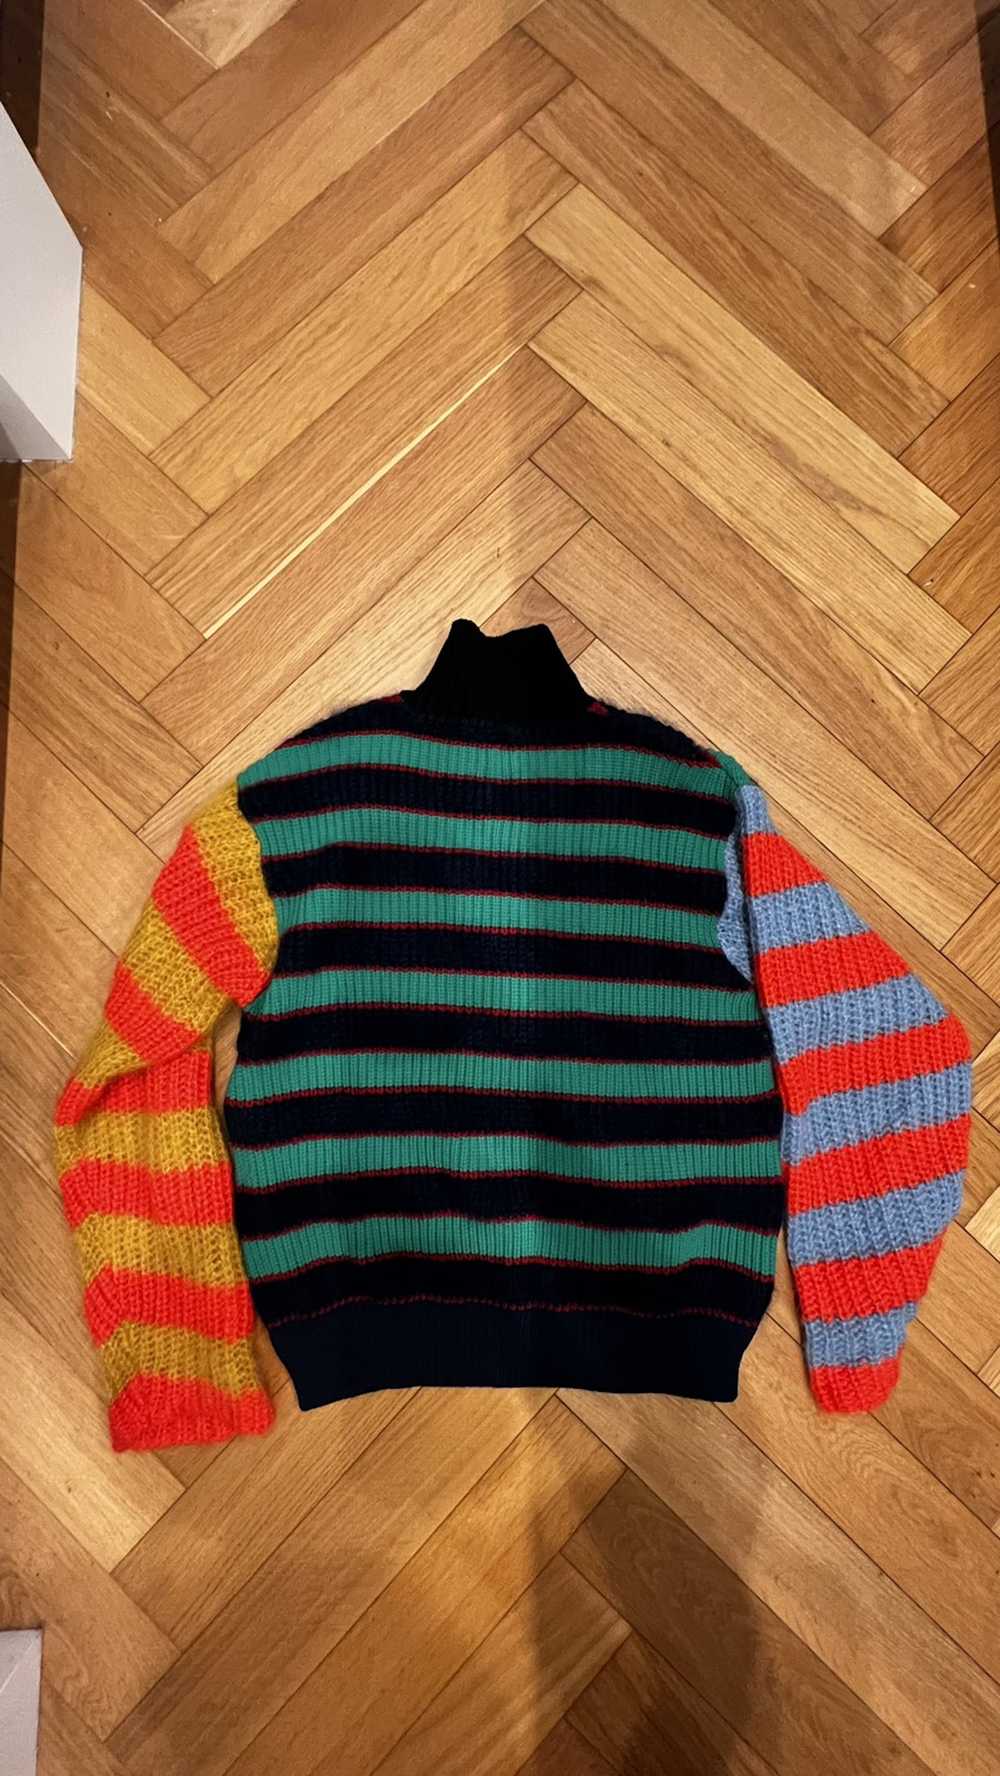 Kenzo KENZO Collection Momento 3 Knit Sweater - image 2